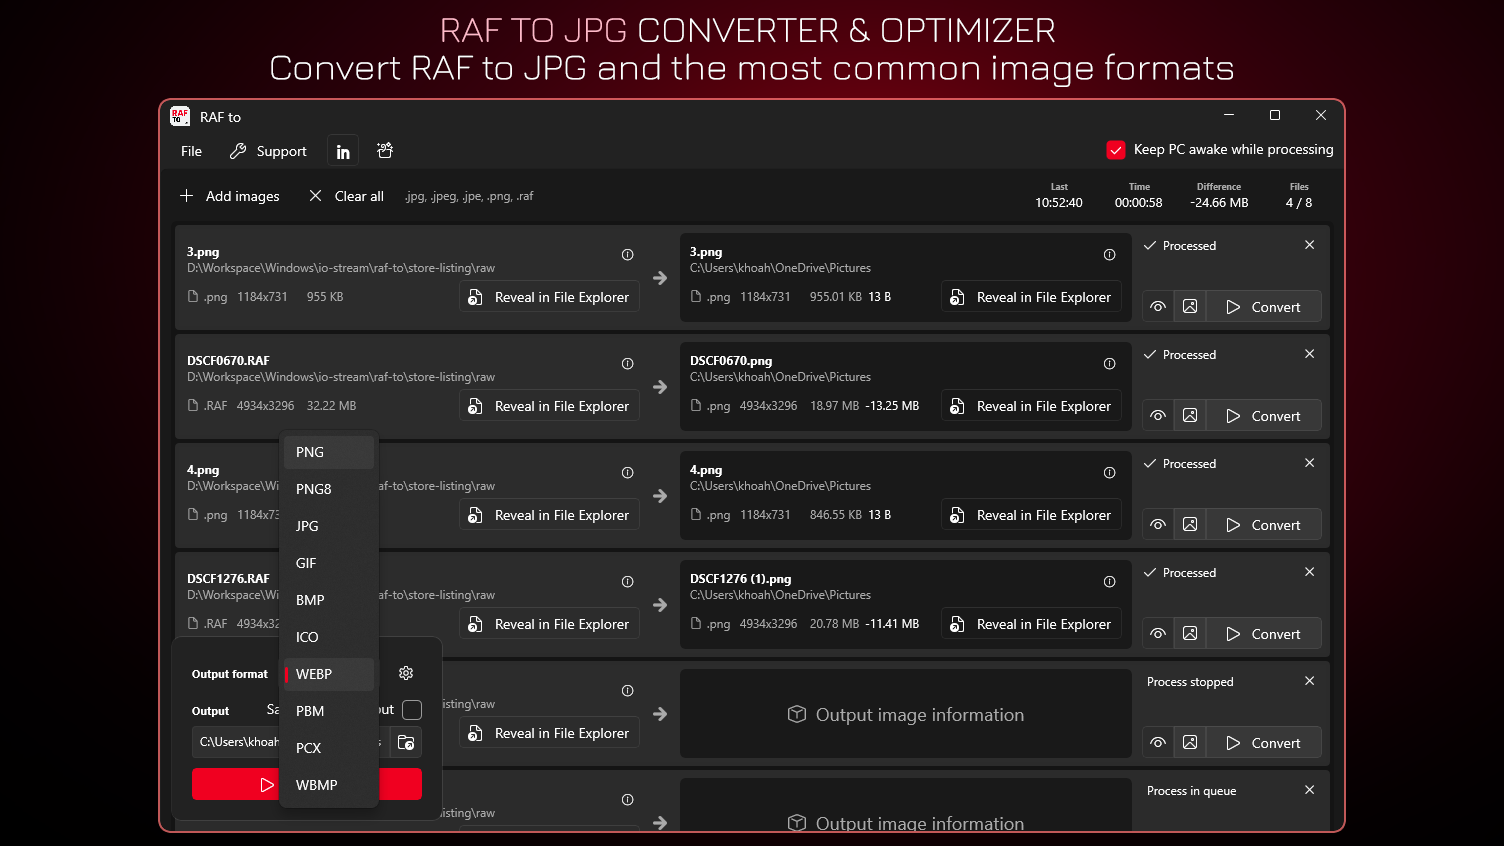 RAF to JPG Converter & Optimizer - Convert RAF to JPG and the most common image formats.